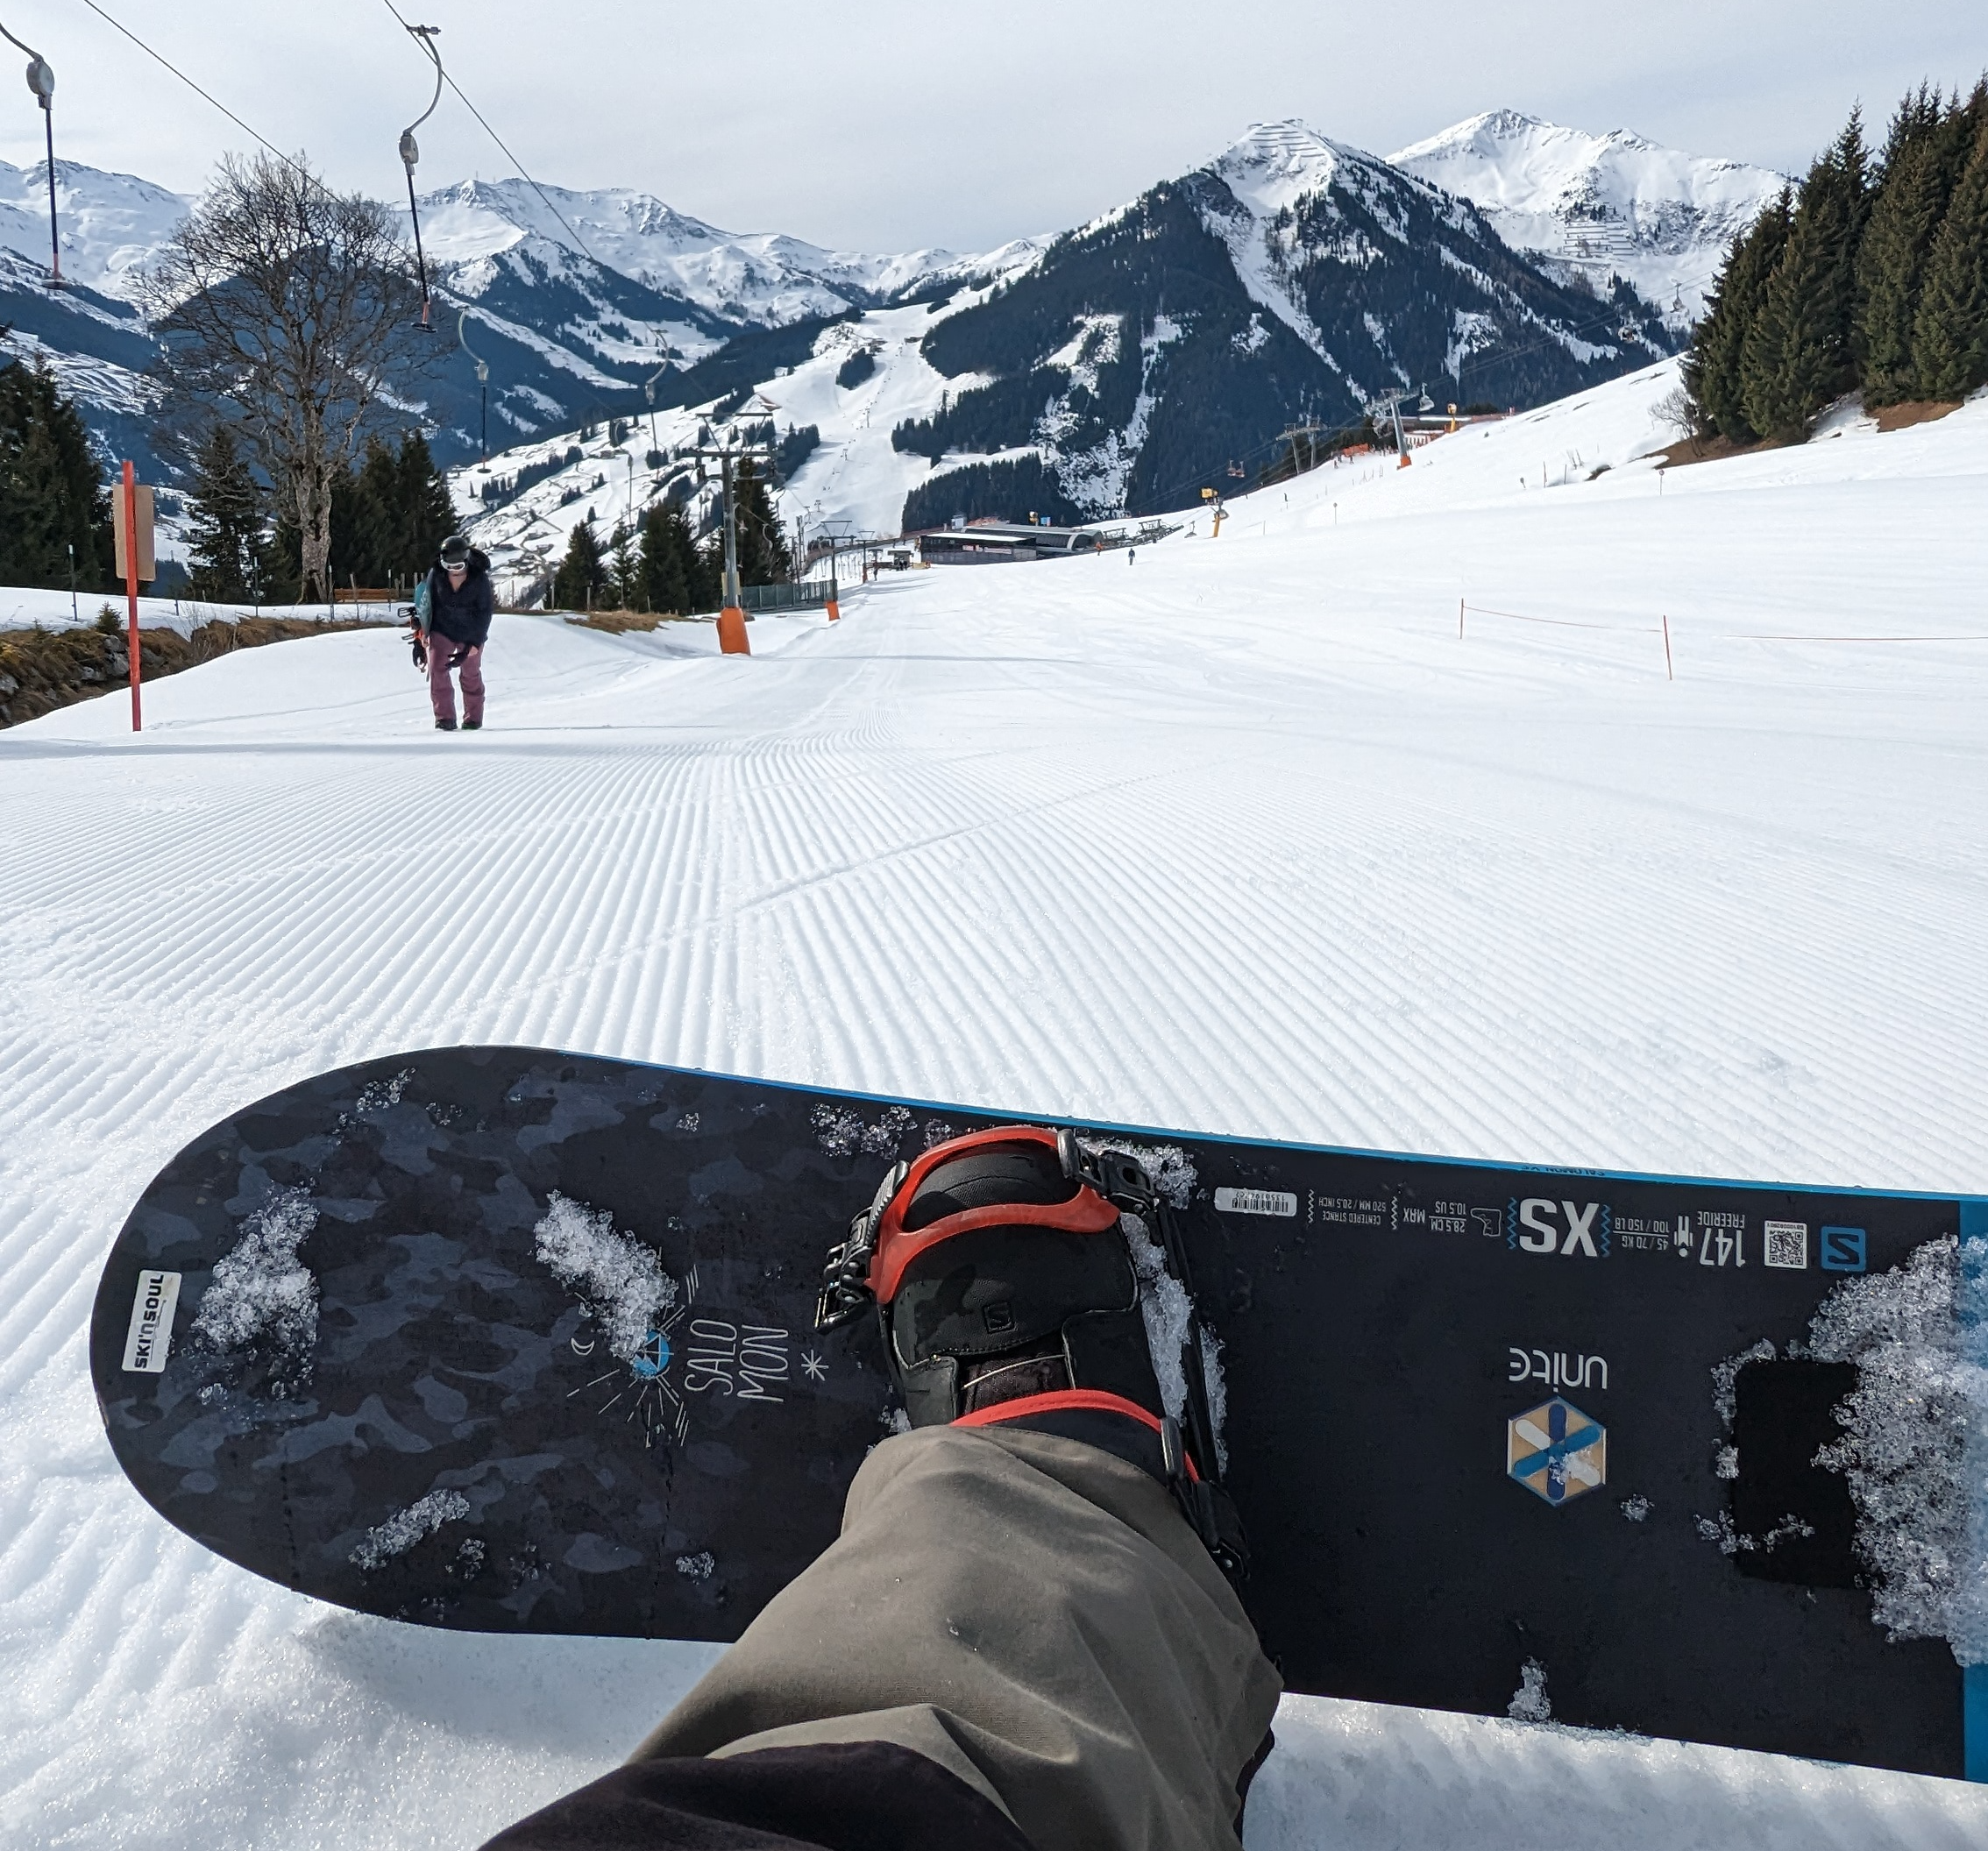 Snowboarding in the baby slopes of Saalbach-Hinterglemm